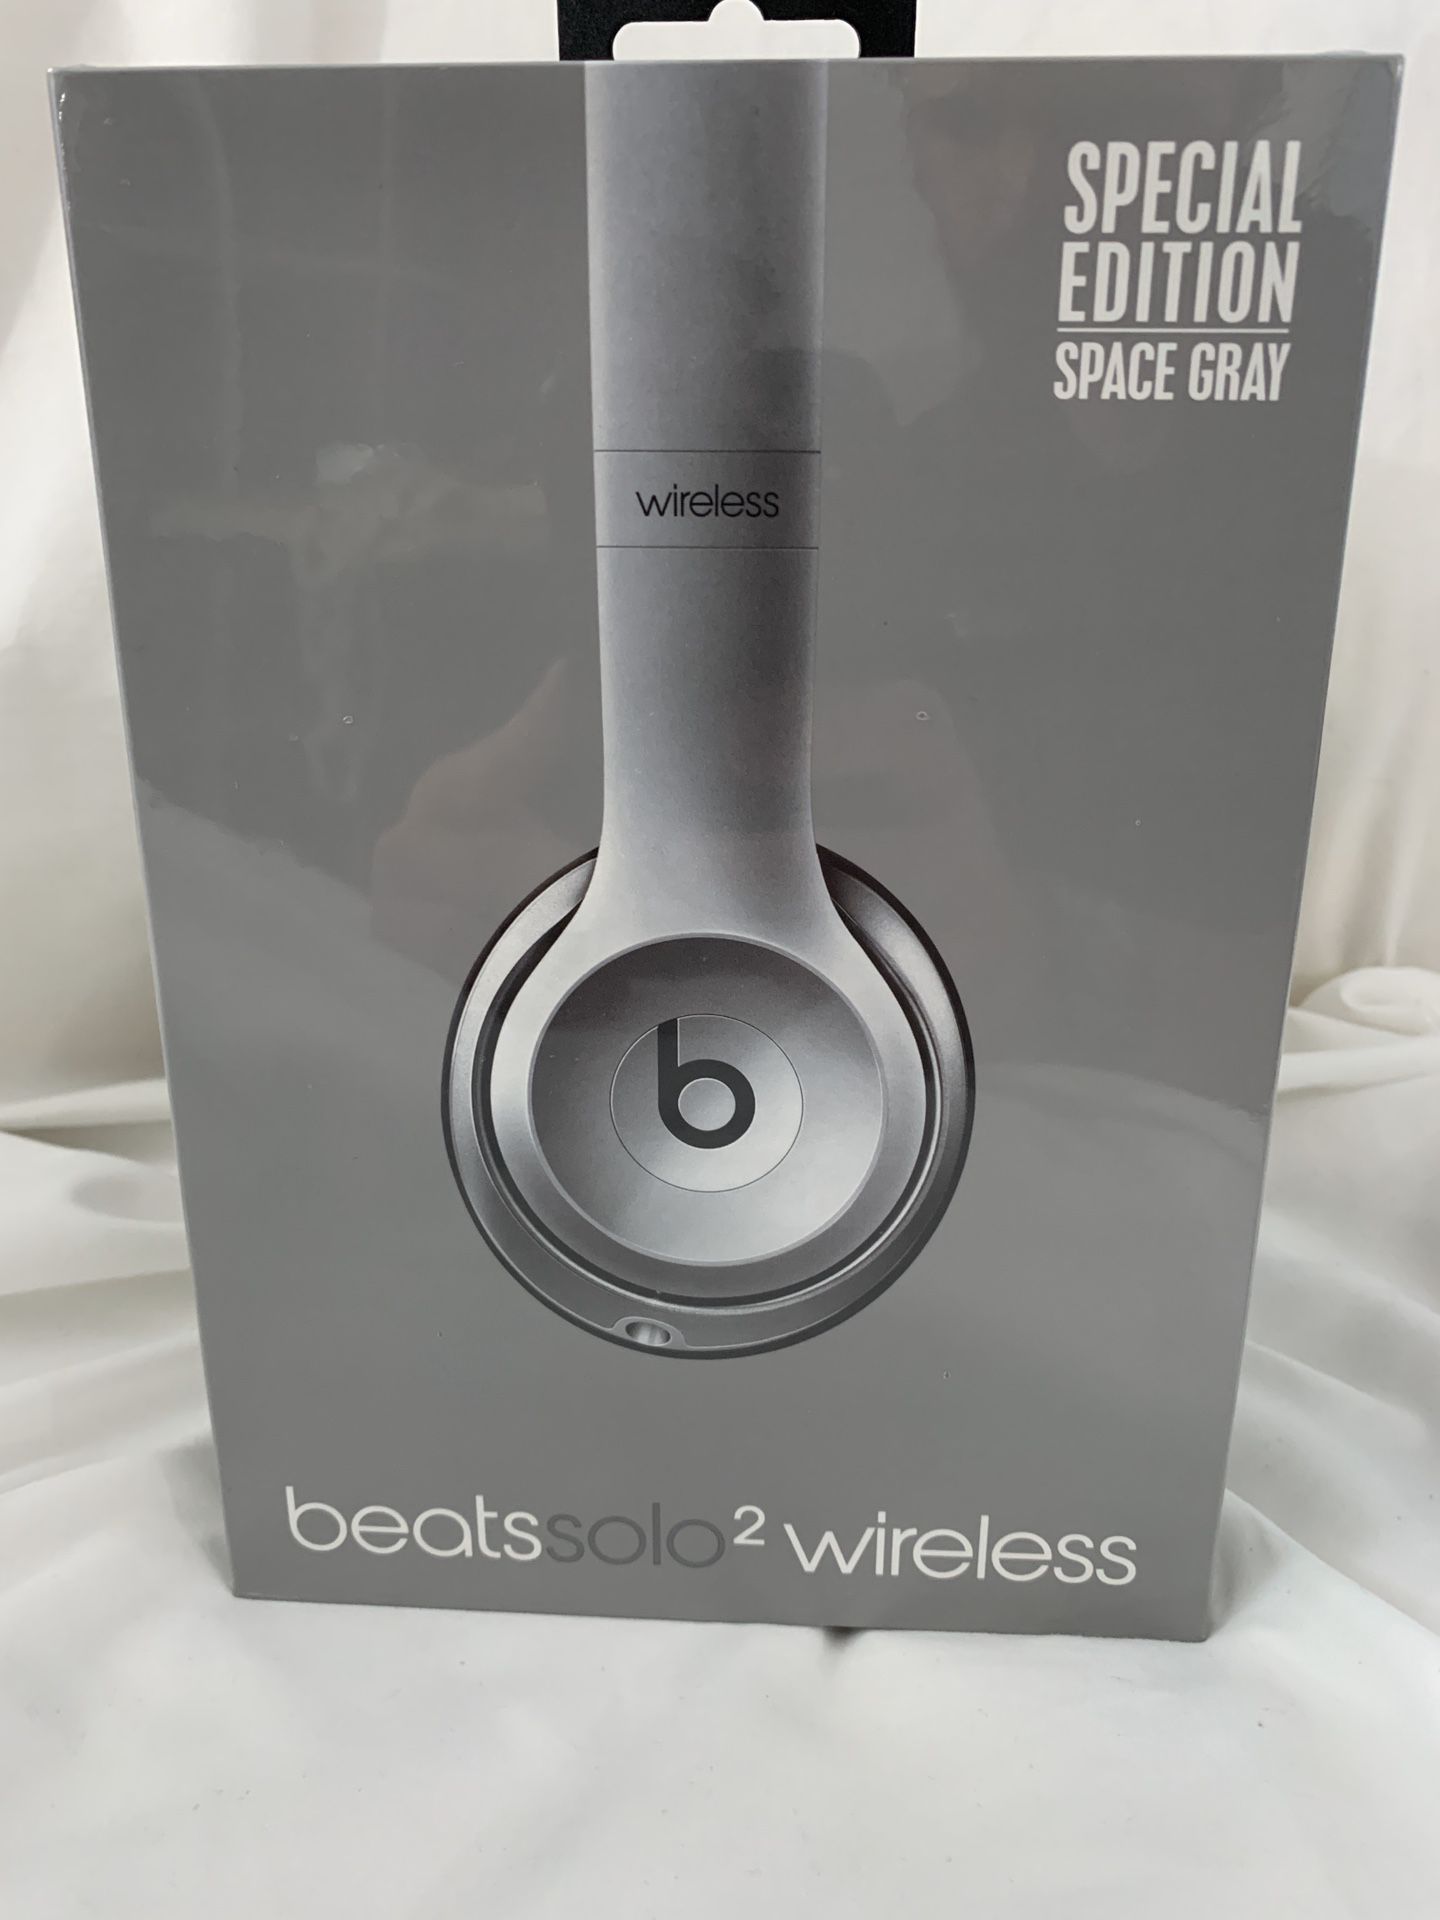 BRAND NEW Beats Solo2 Wireless Headphones - Special Edition